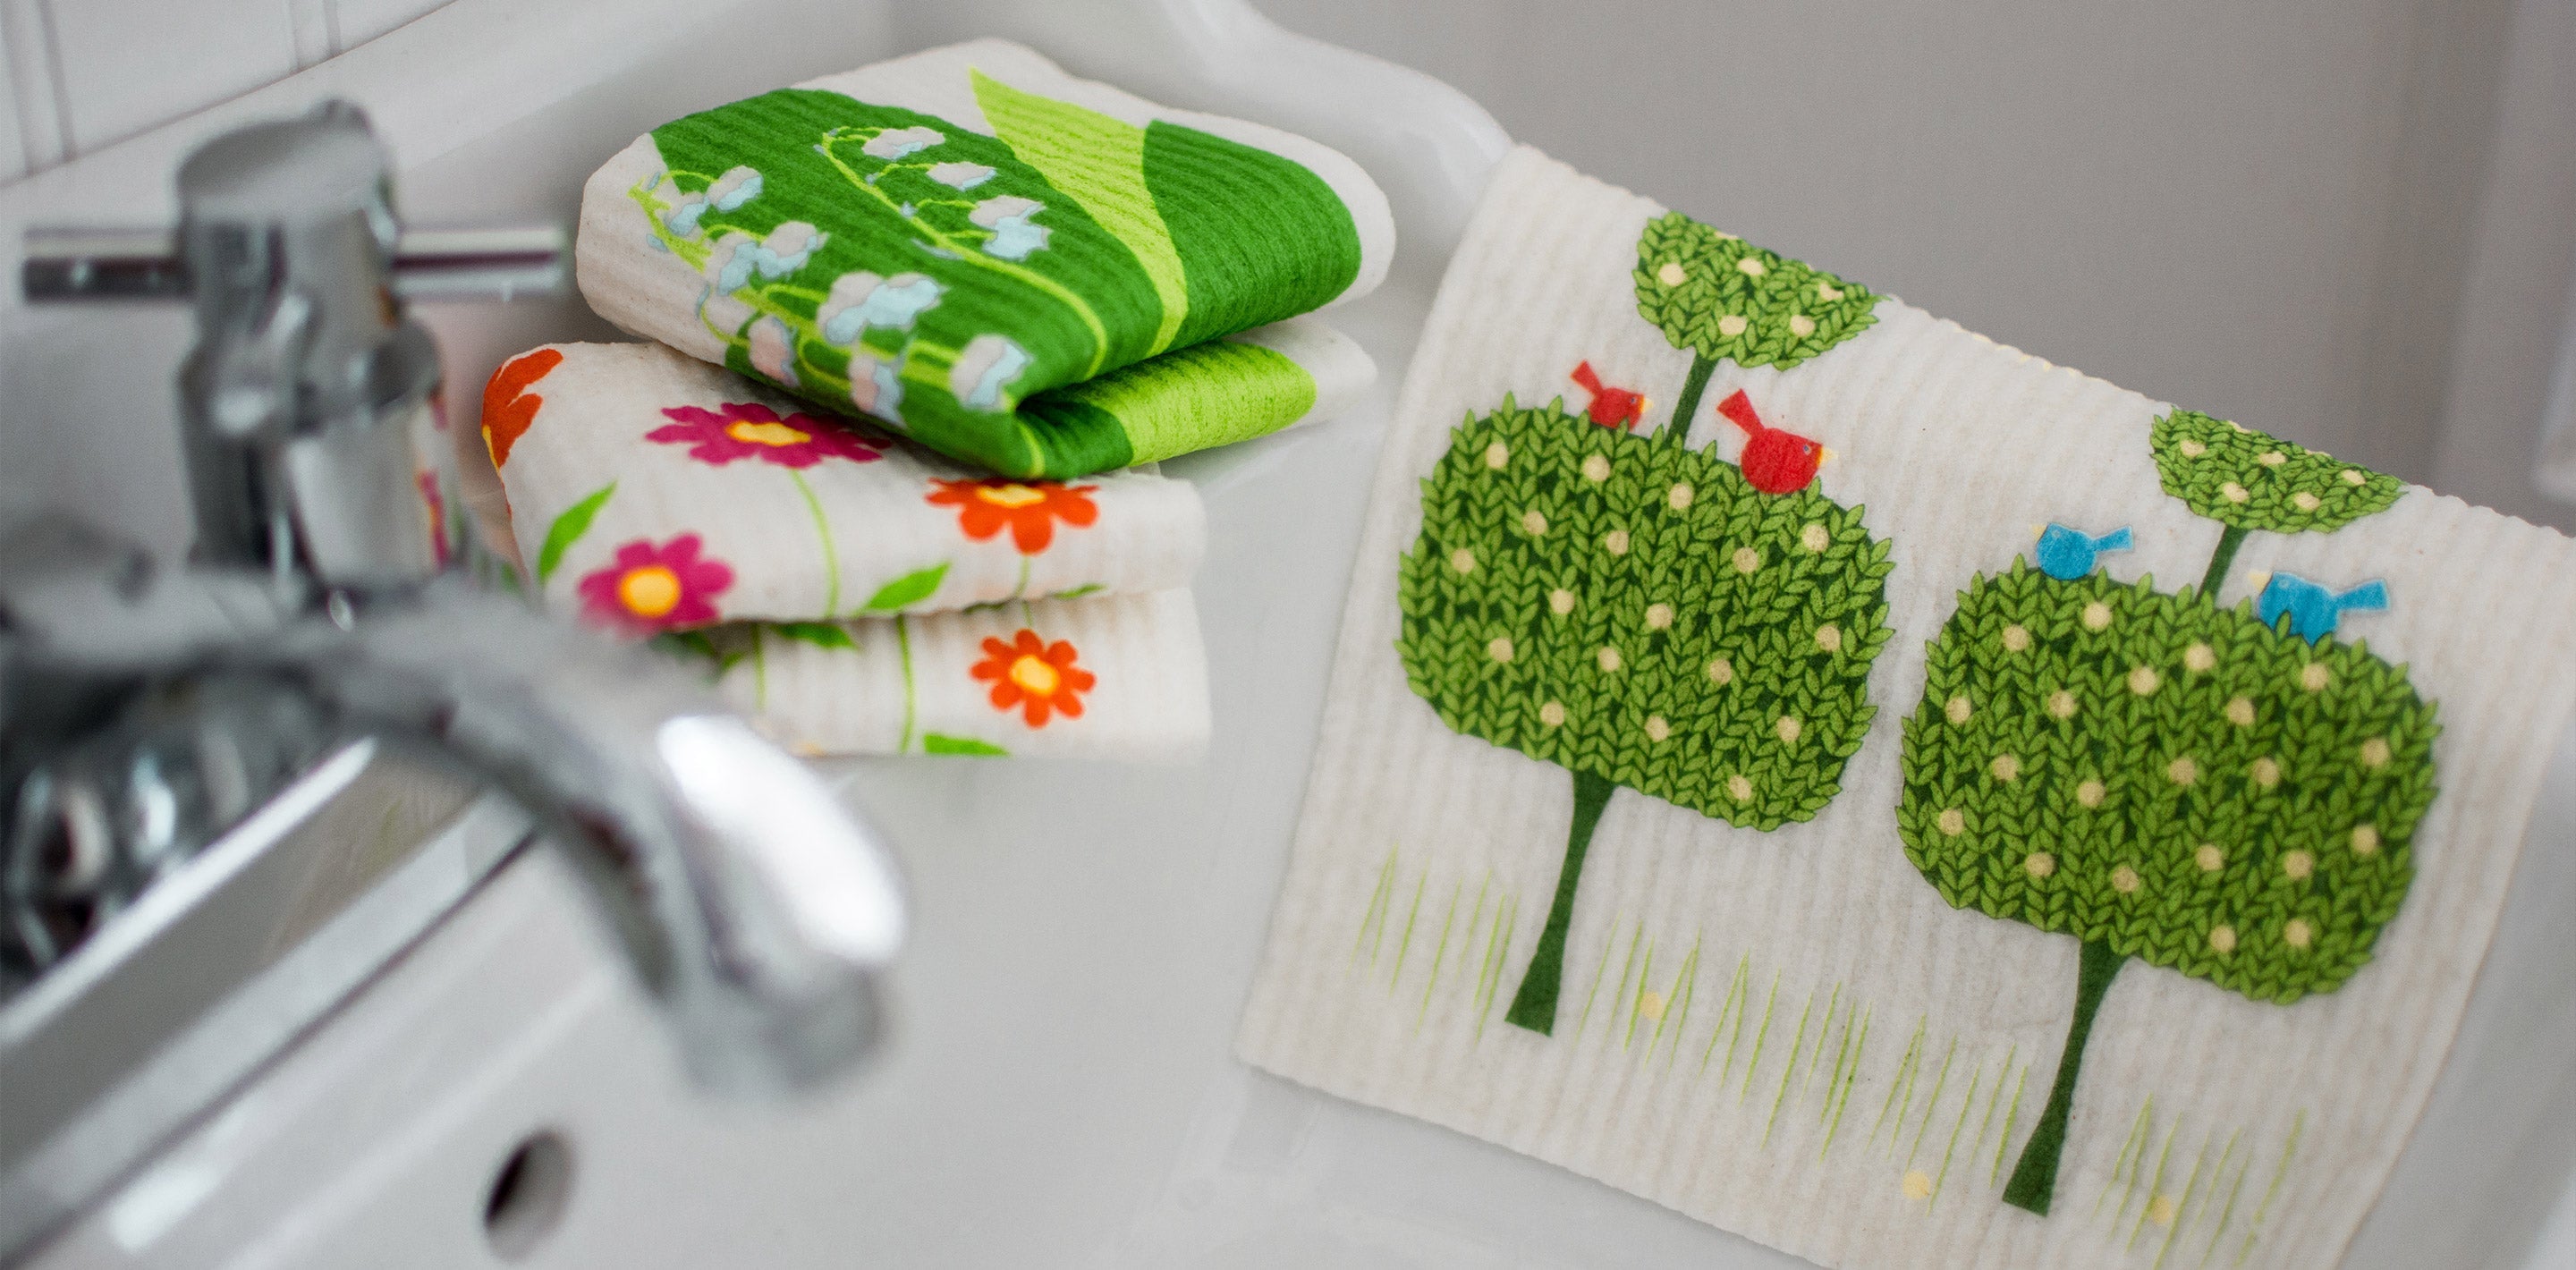 BIRDY. Kitchen Towel S  Kitchen towels, Dishes and glasses, Towel